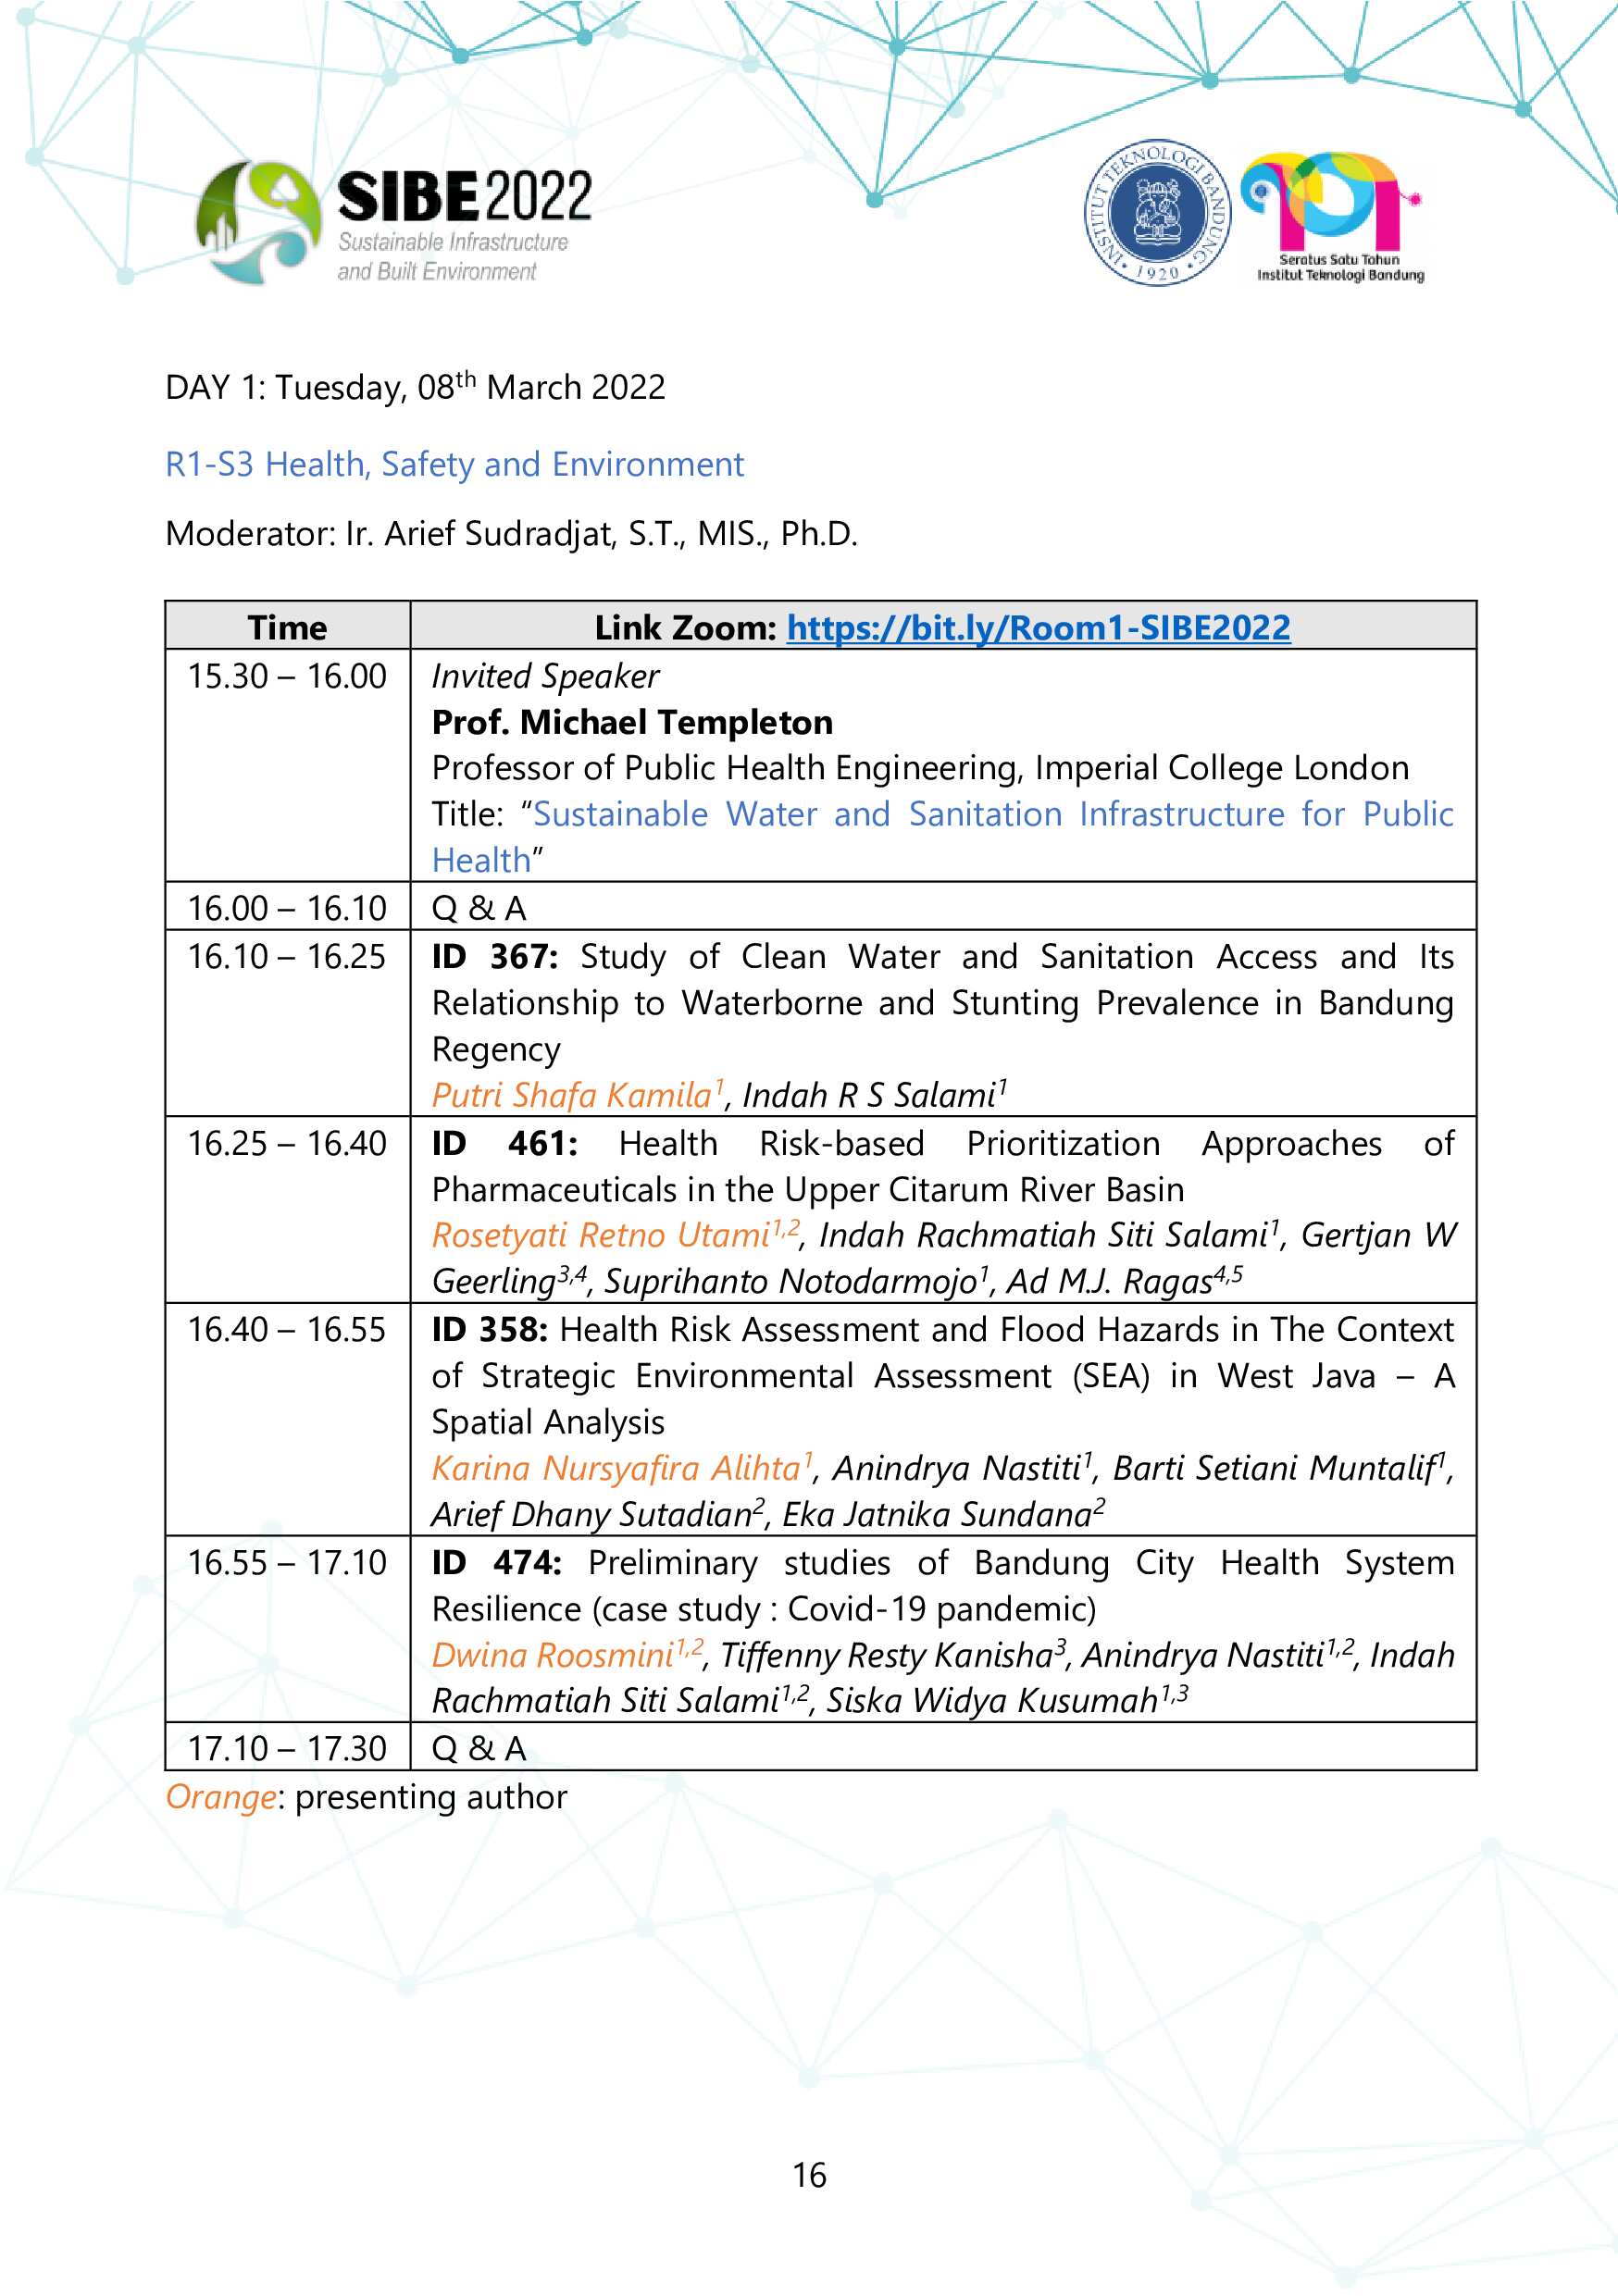 SIBE 2022 Program Schedule 8-9 March 2022-15